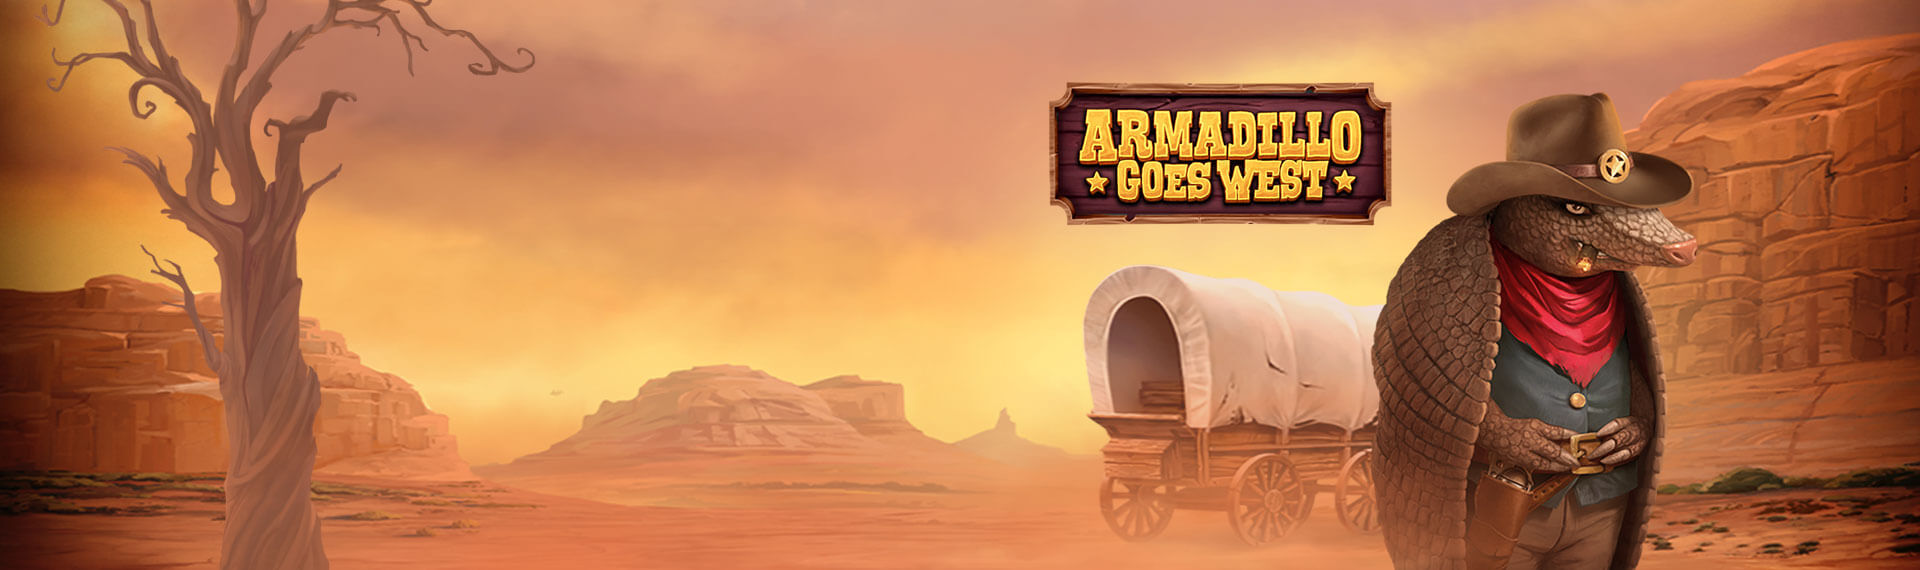 Armadillo Goes West Screenshot <br />
<b>Notice</b>:  Undefined variable: key in <b>/var/www/html/wp-content/themes/armadillo/page-game.php</b> on line <b>37</b><br />
1